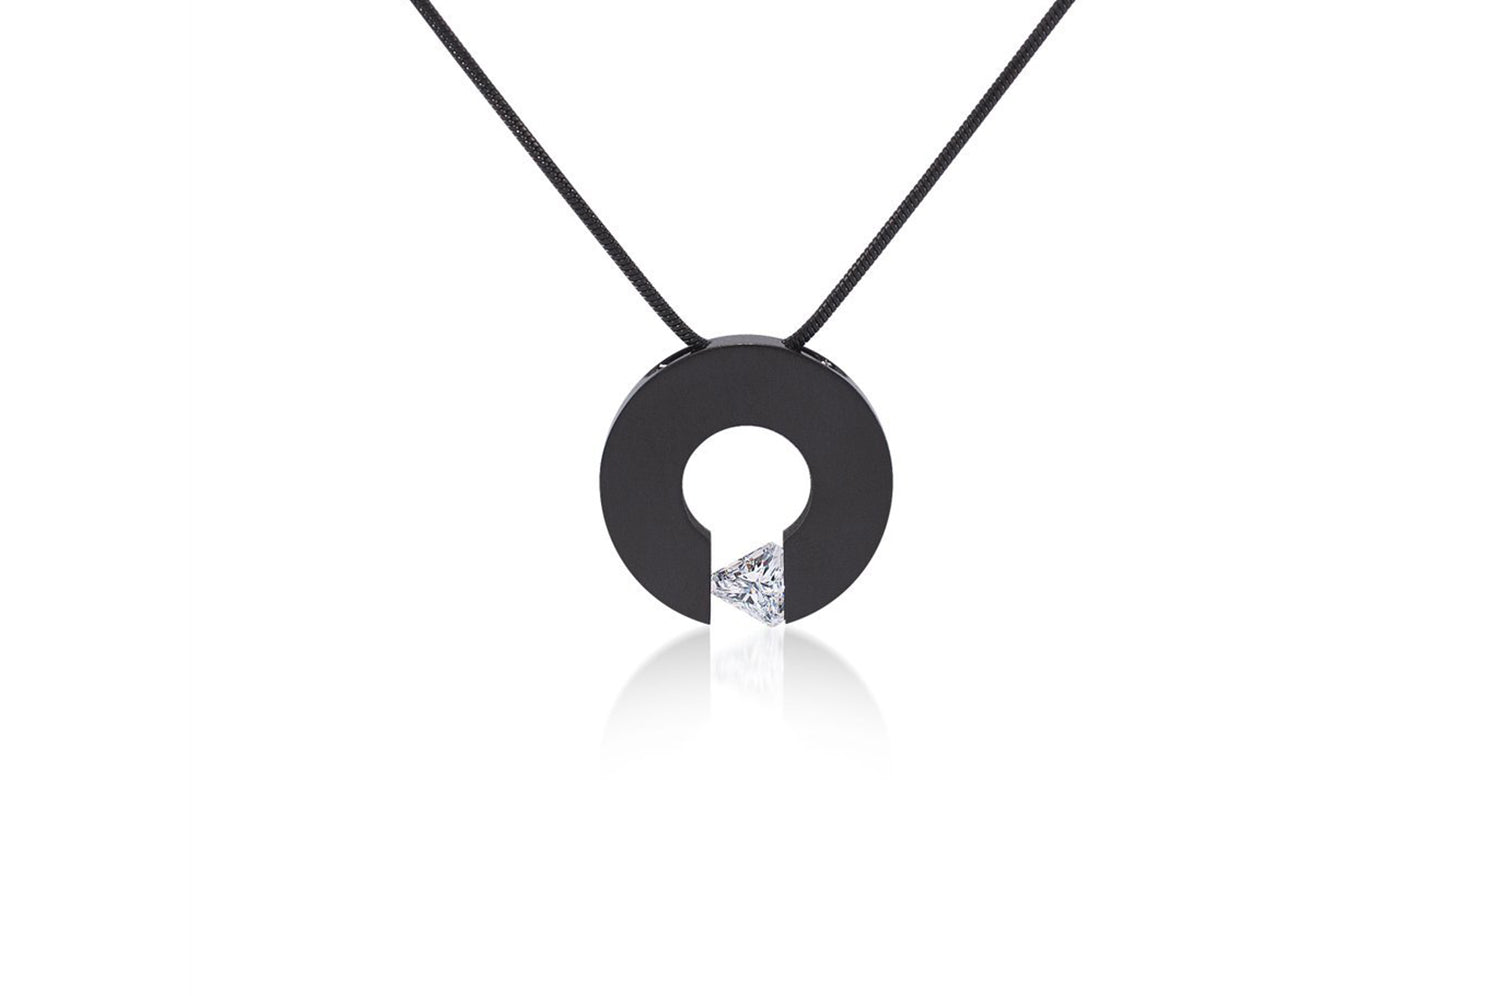 Malfinia Black Anodized Stainless Steel Necklace